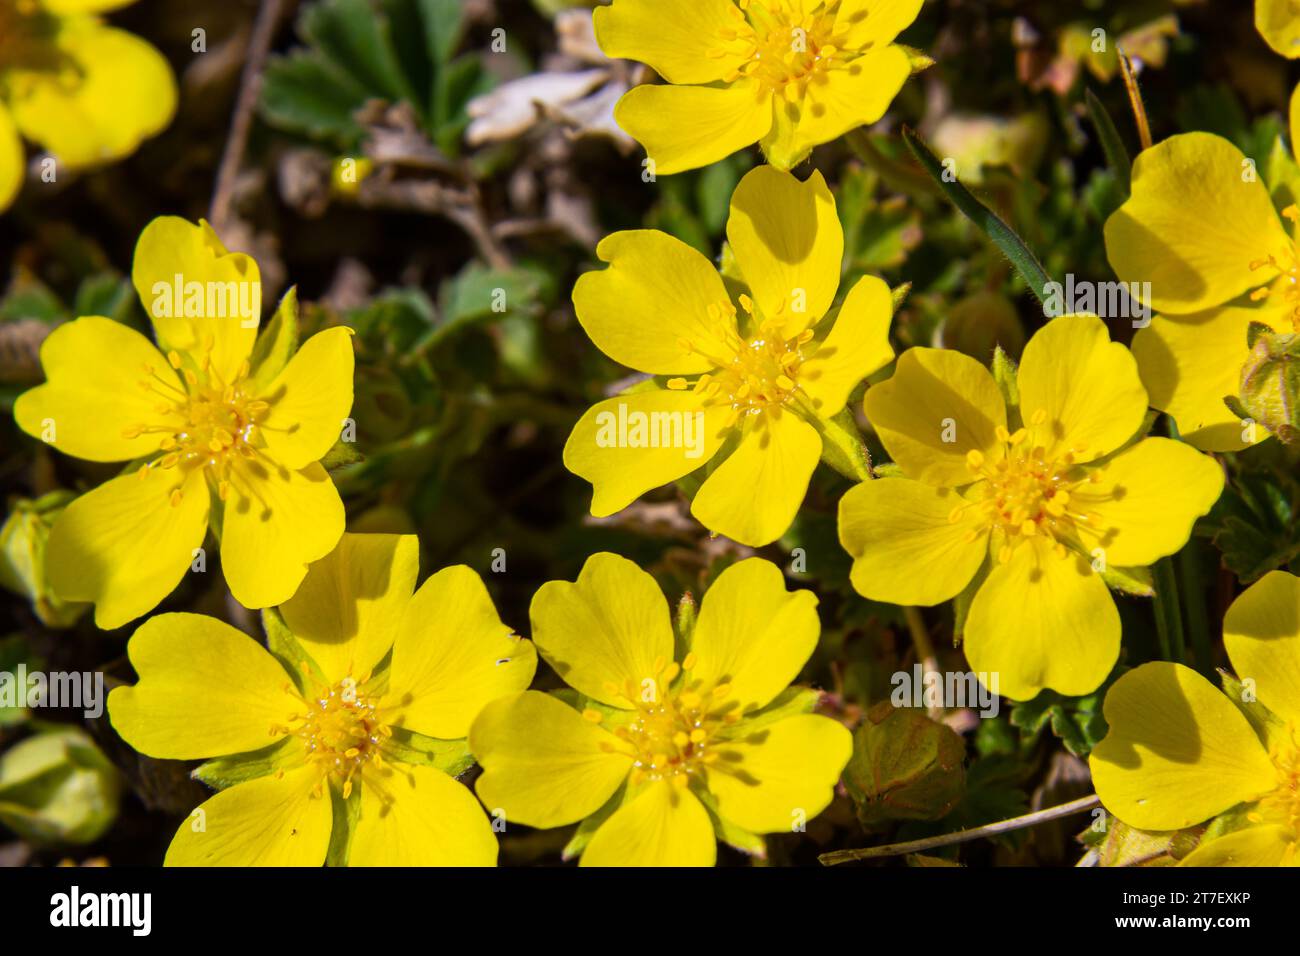 Tiny flowers of Potentilla arenaria on a xerotherm meadow. Wild yellow flowers growing on sand soil. Stock Photo